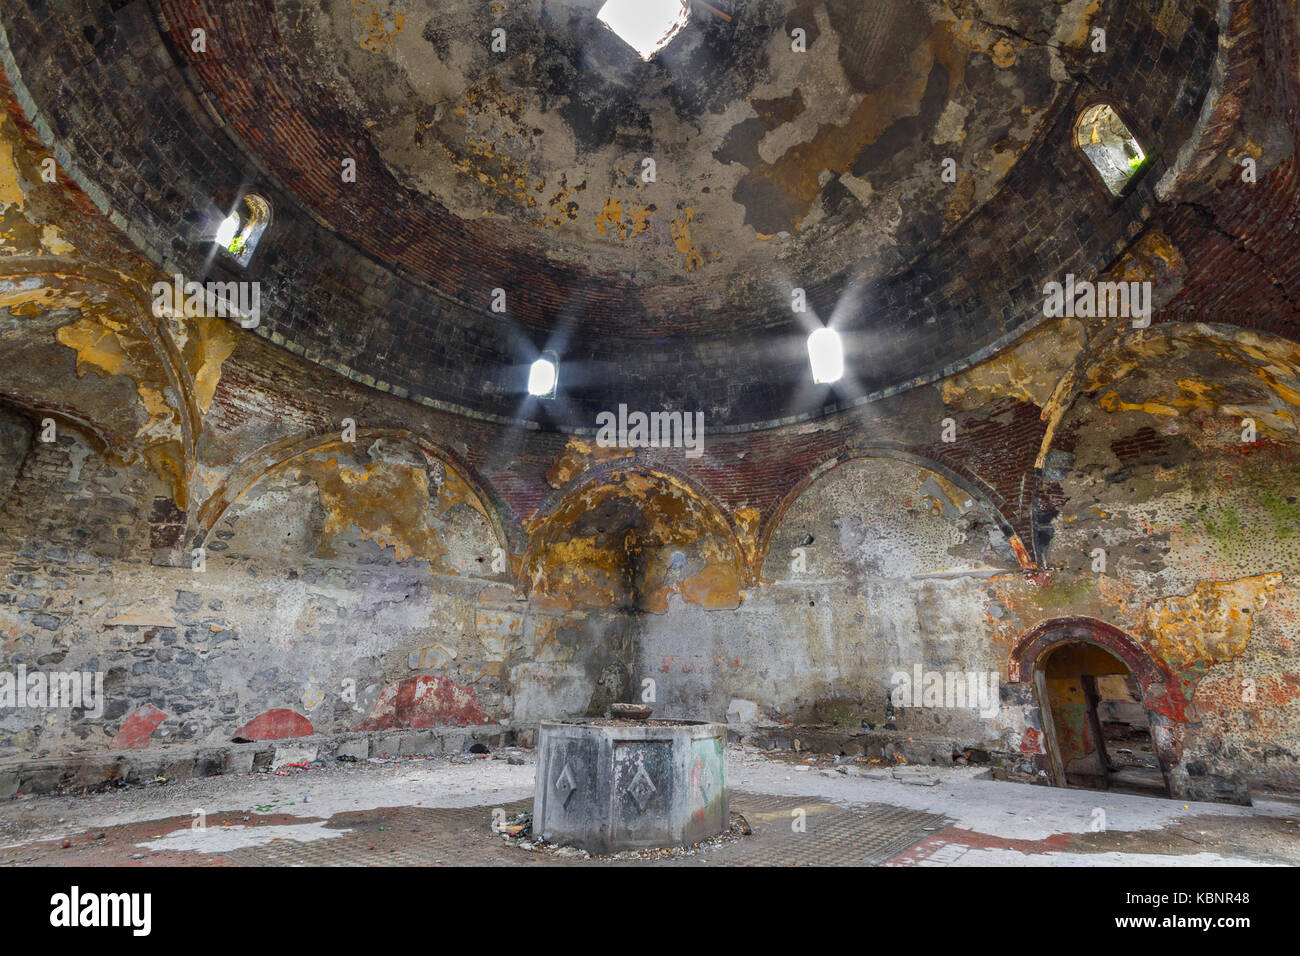 Abandoned historical Turkish Bath built by the Ottomans, in Kars, Turkey. Stock Photo